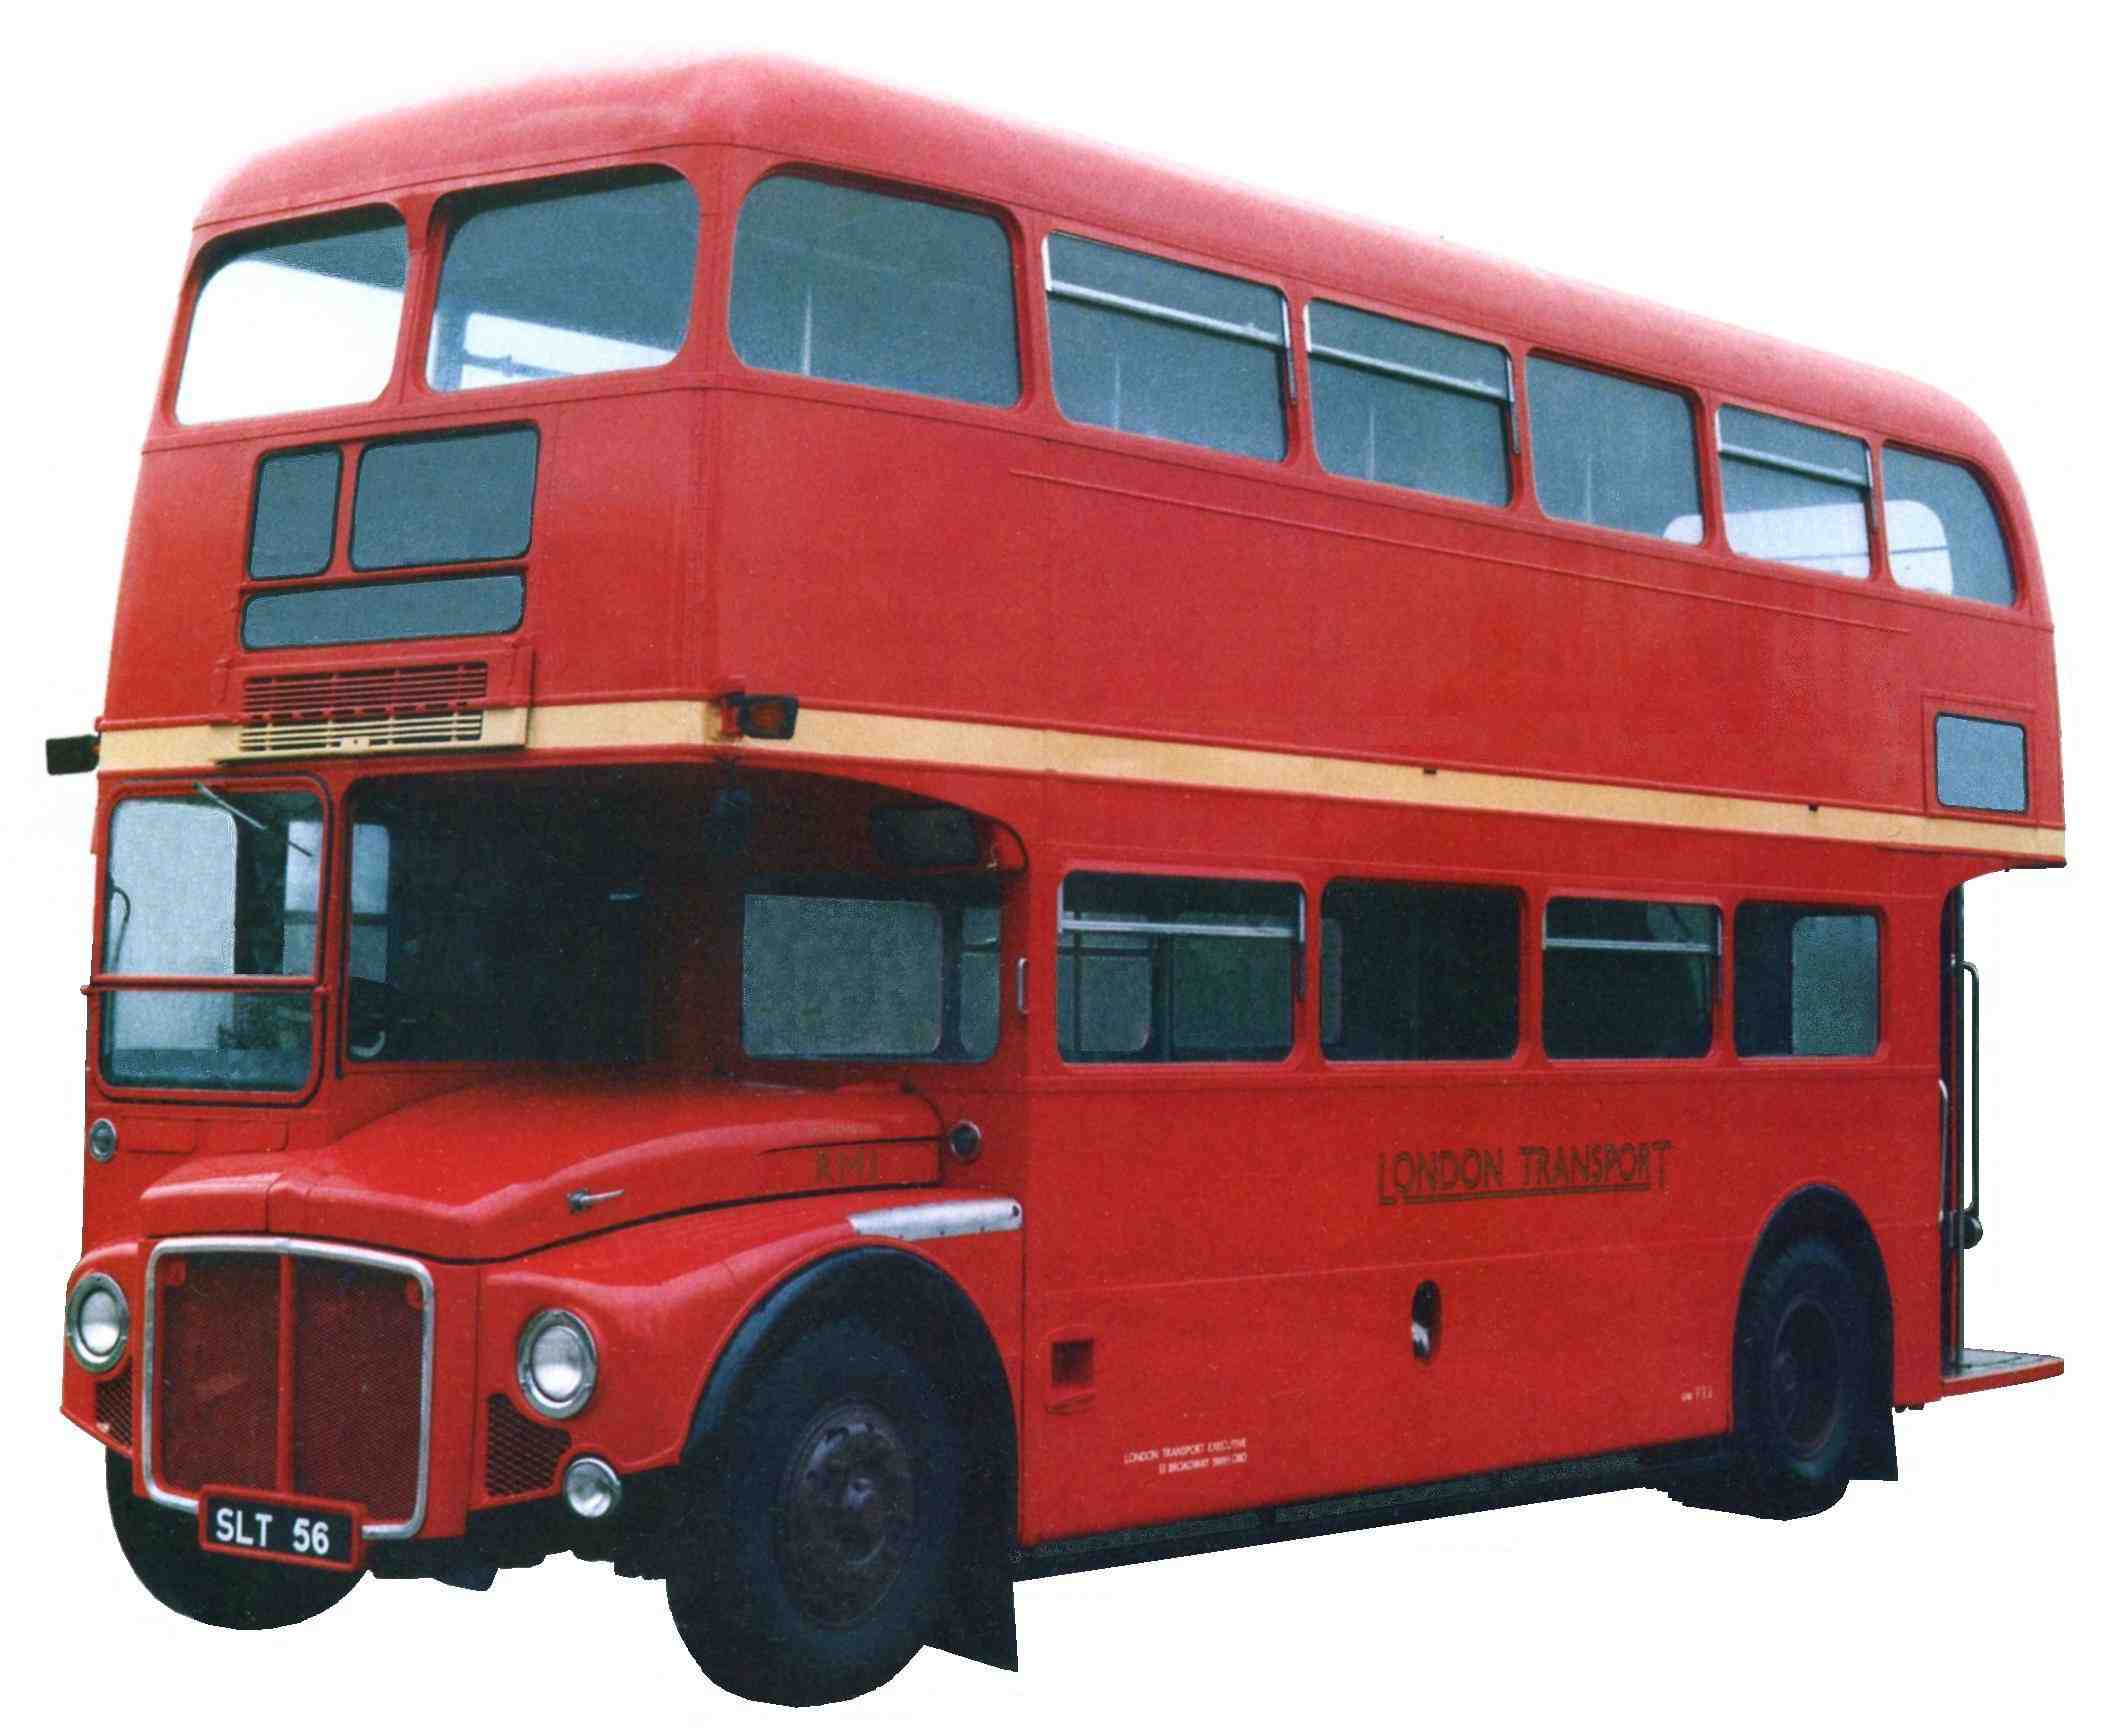 The London Transport Routemaster Bus